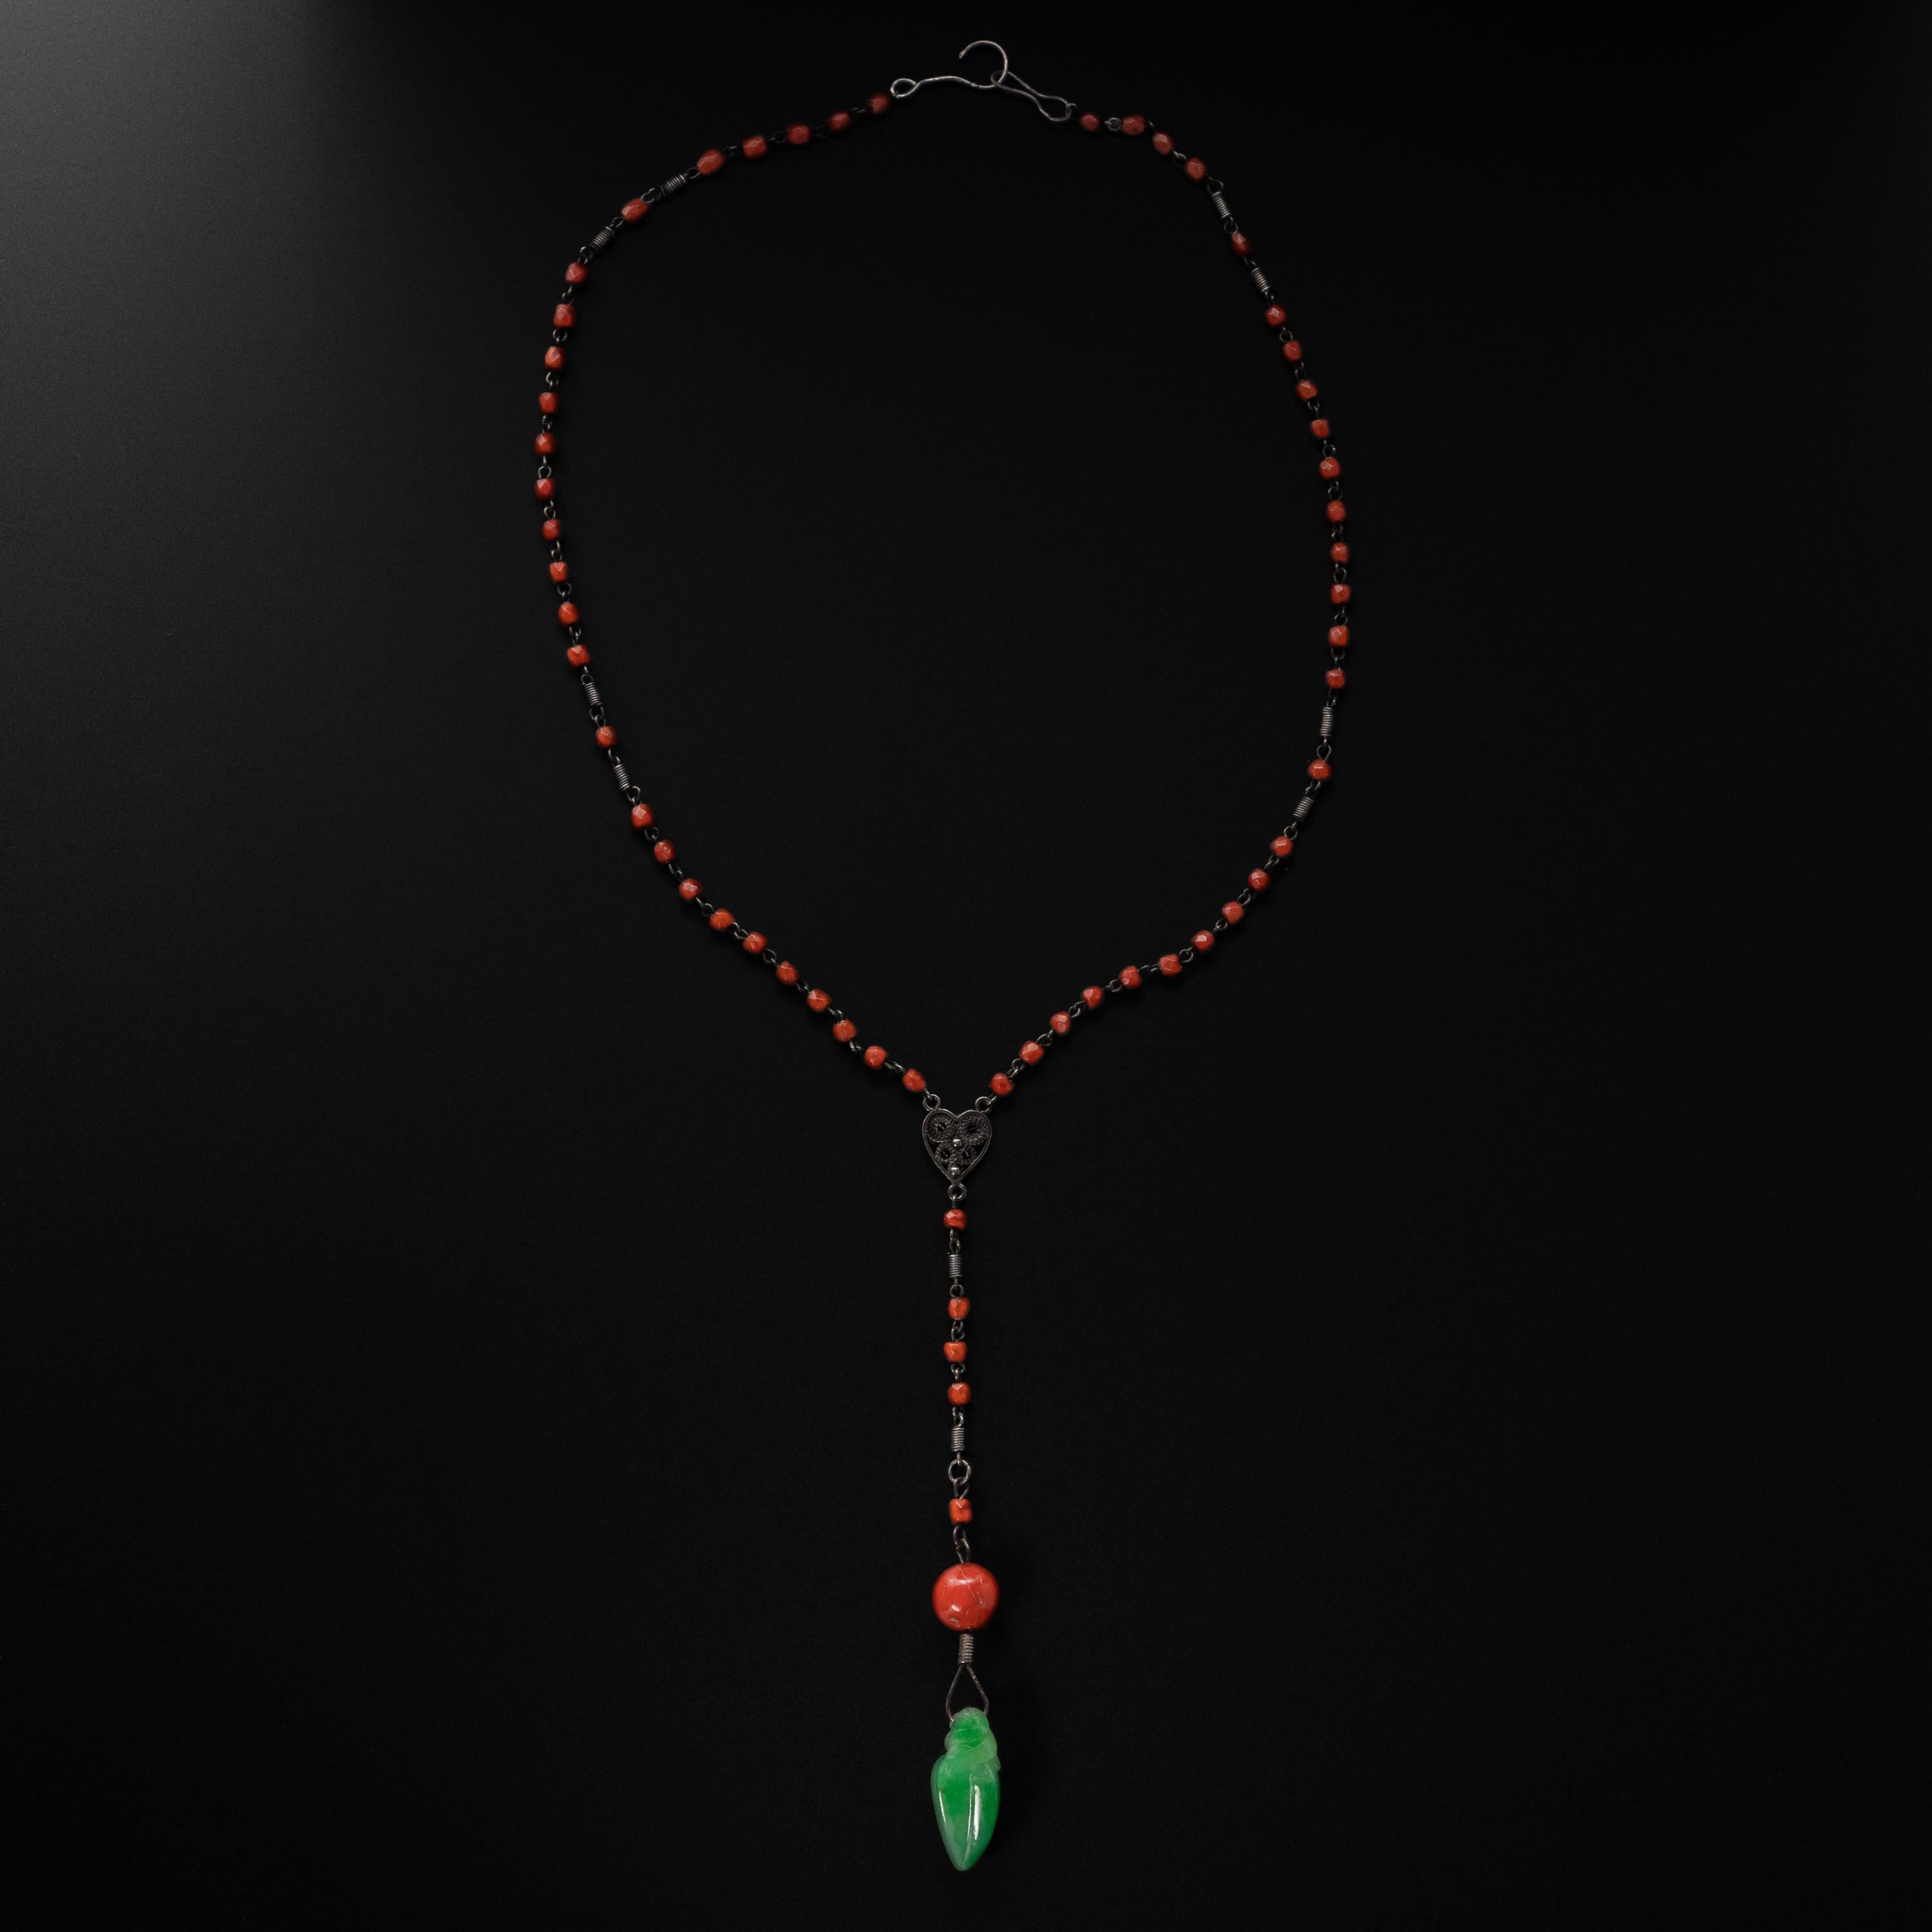 This 1930s-era Art Deco necklace features a gorgeous apple green natural Burmese jadeite carved into the form of a star fruit. The 27.40mm x 11.71mm x 11.58mm translucent jade carving is suspended on a silver nail and connected to a large (11mm)